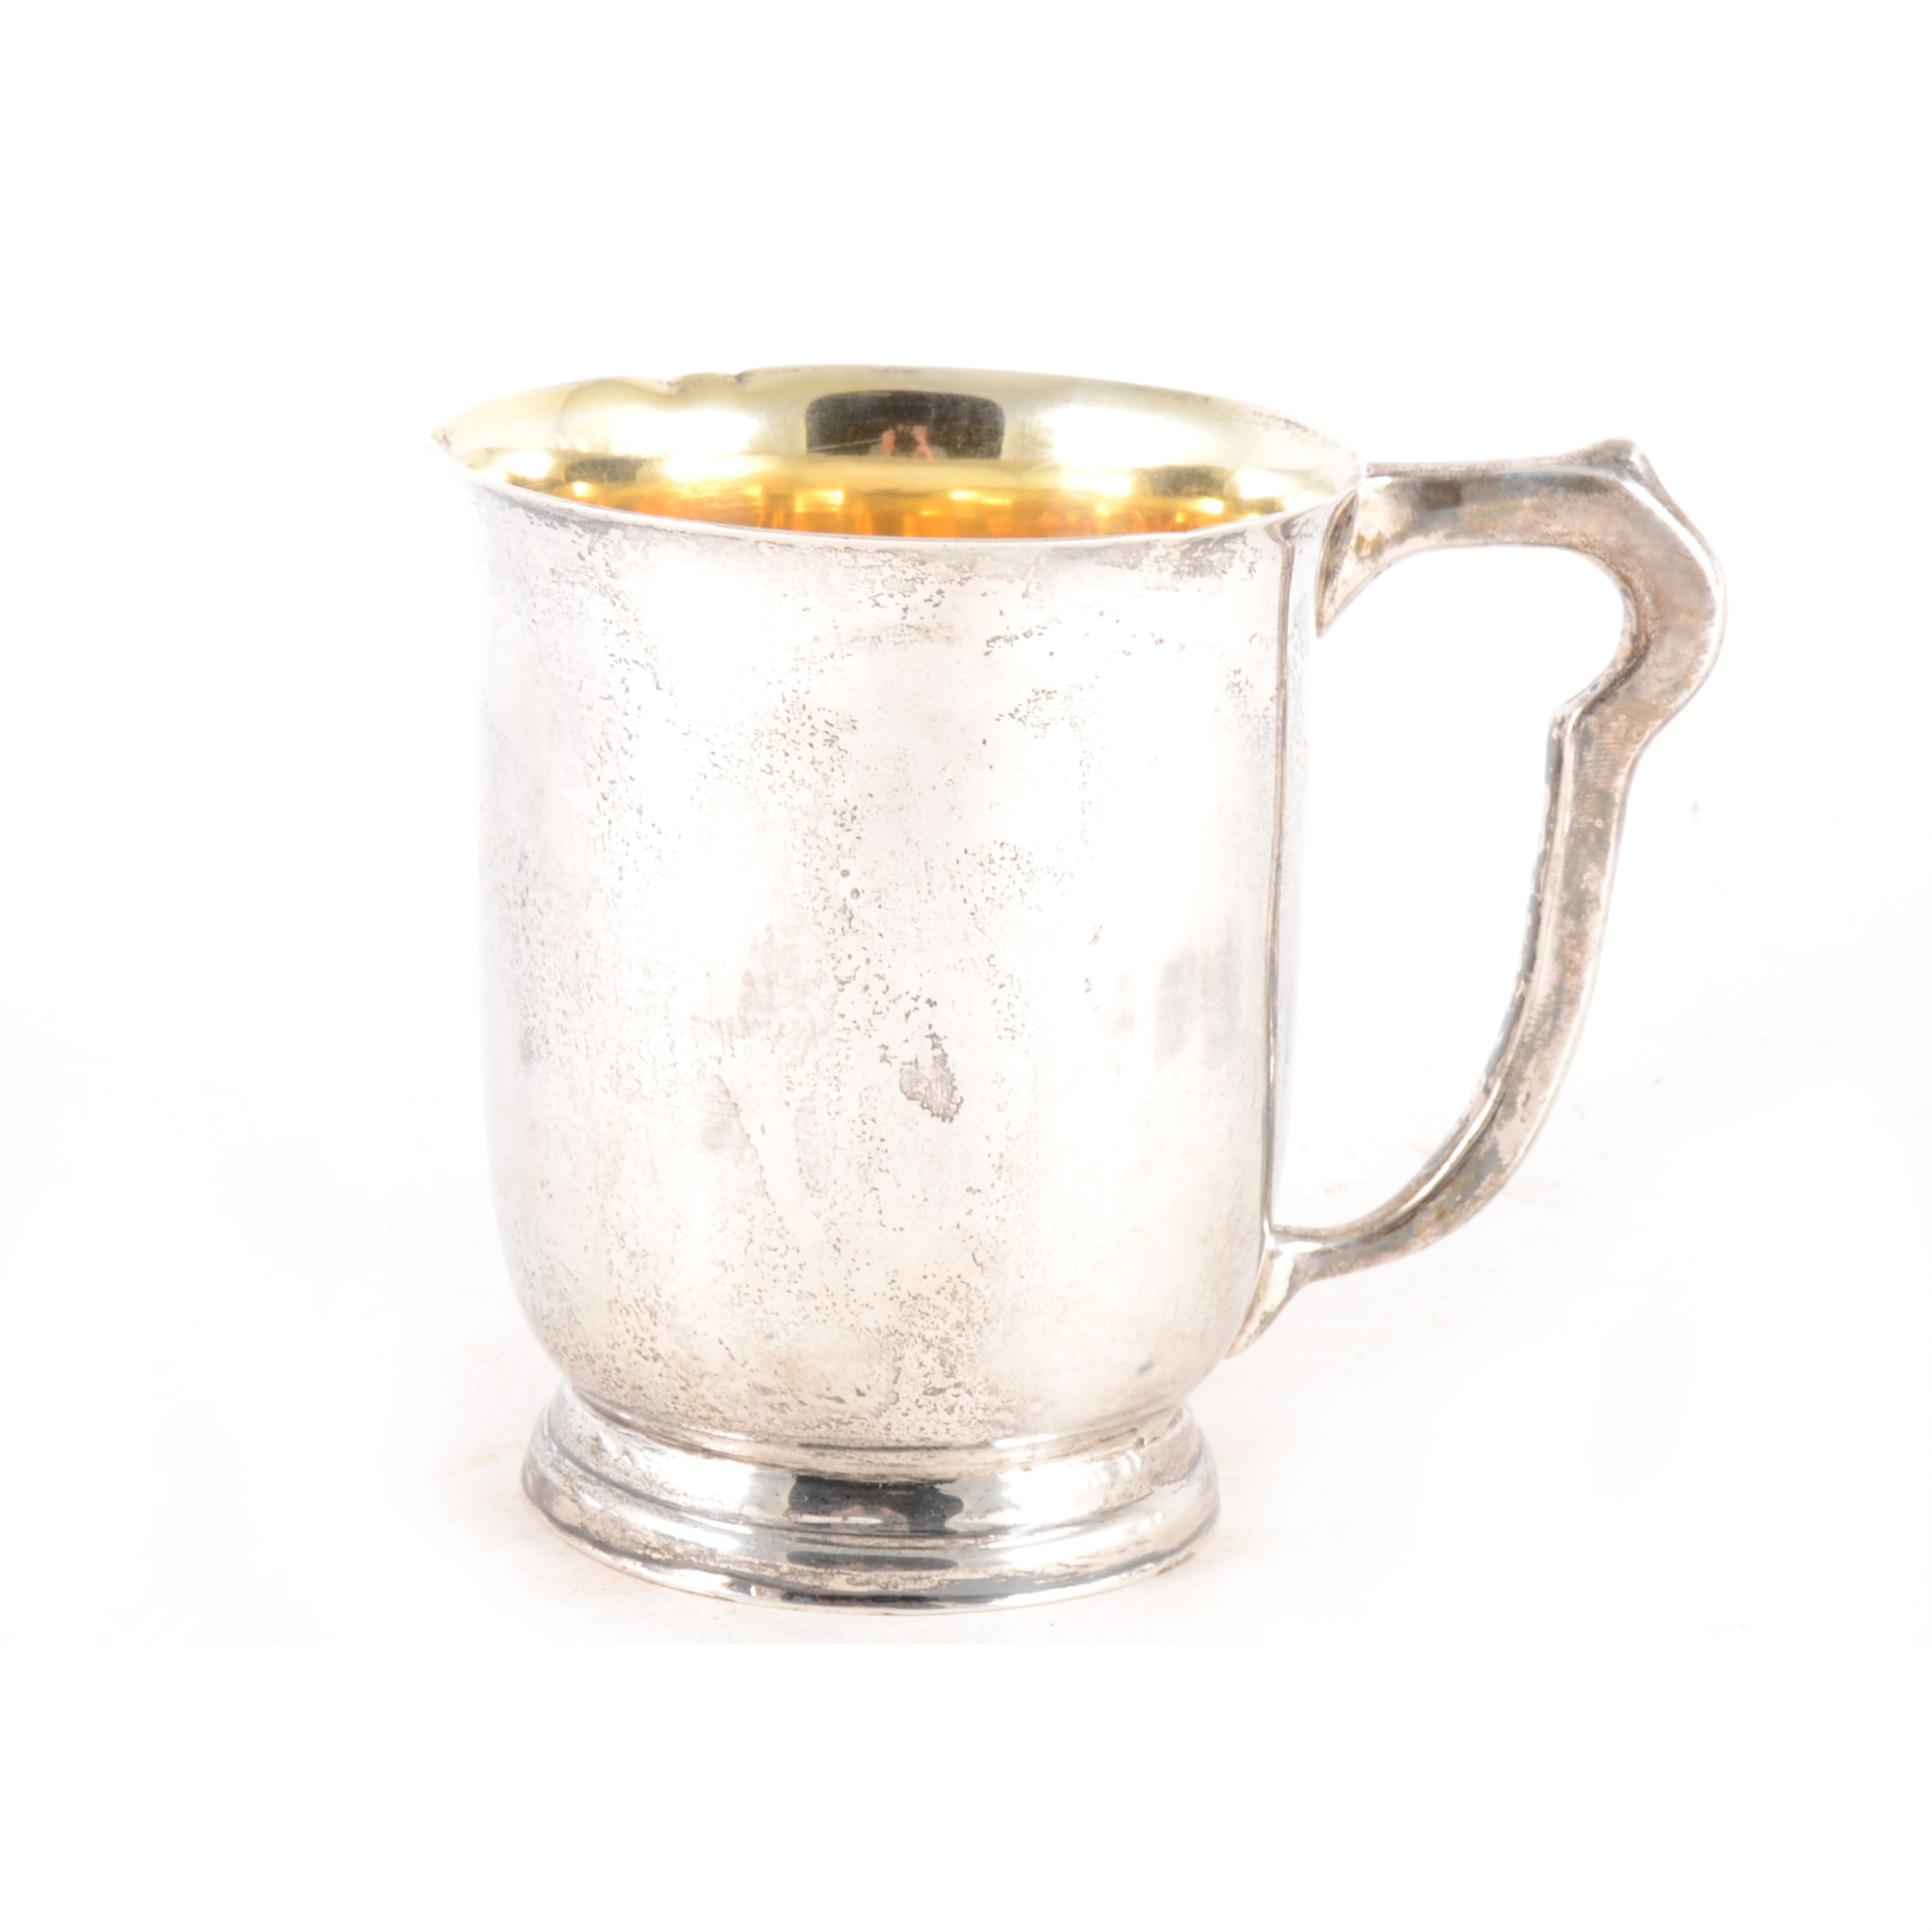 A white metal tankard marked "Sterling Silver"